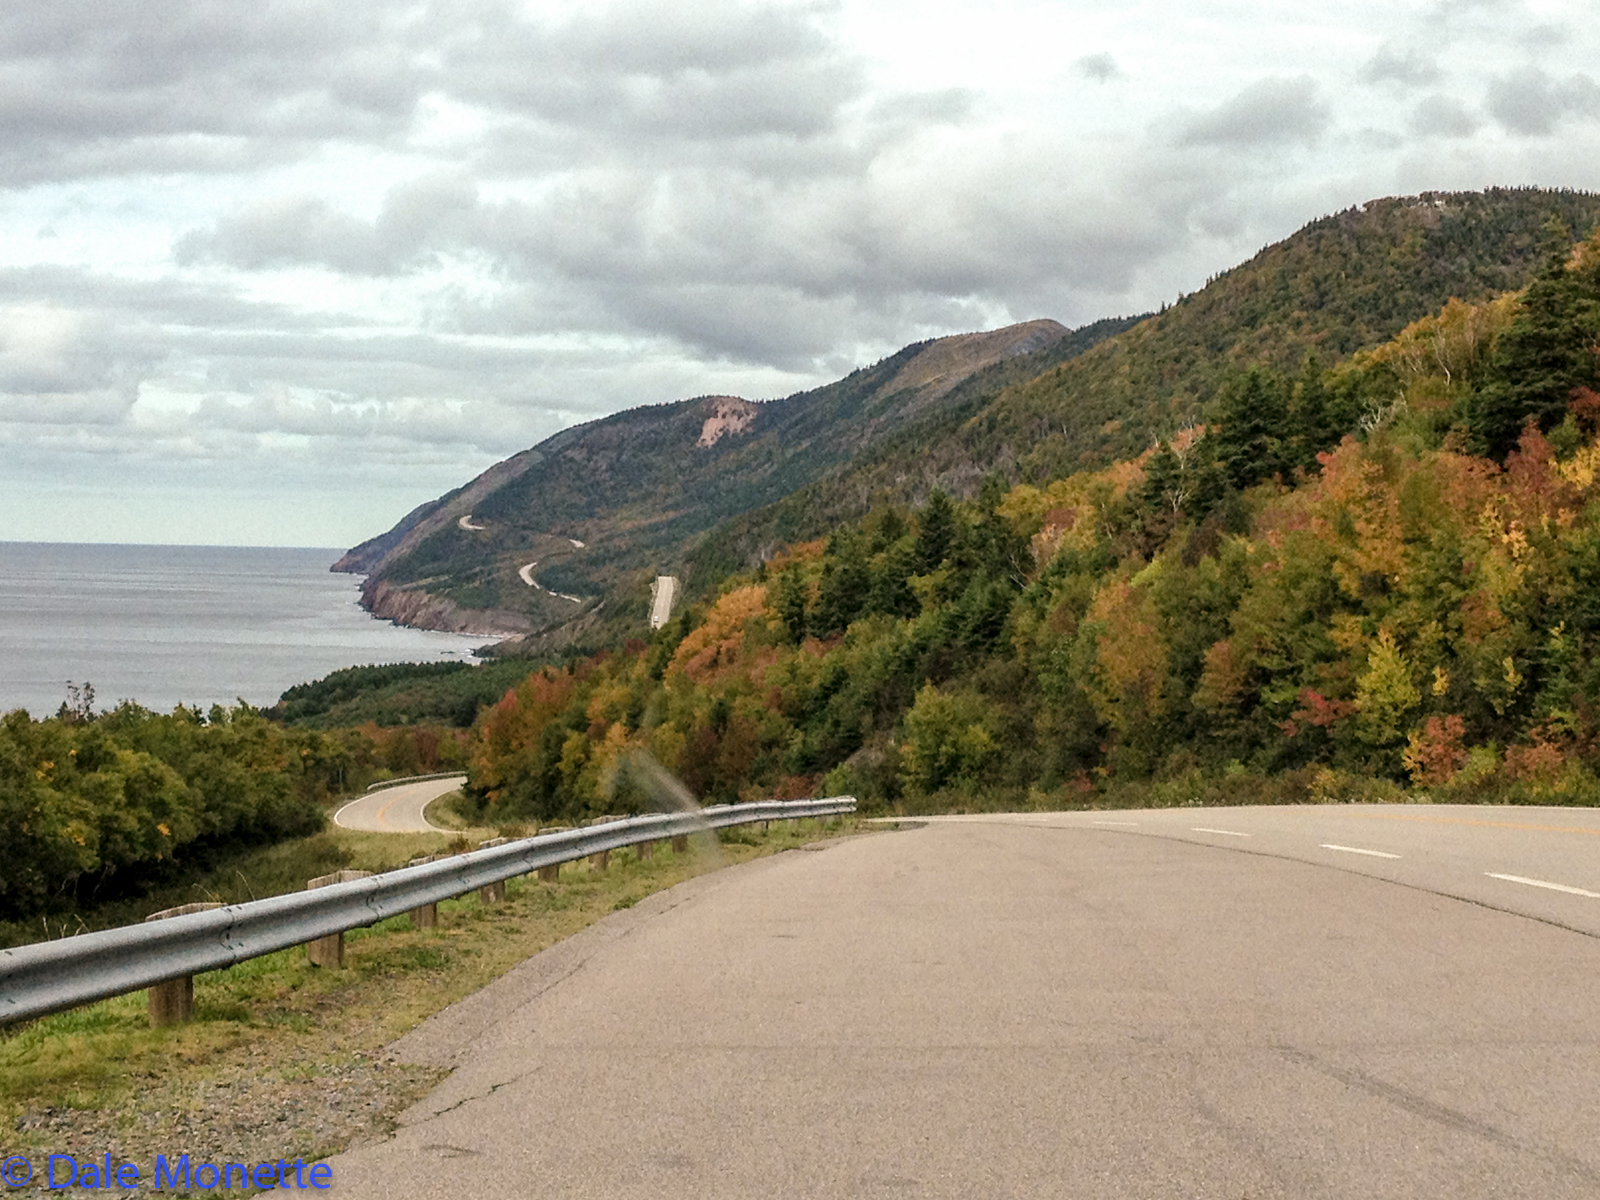   This is the Cabot Trail on the St. Lawrence Seaway&nbsp;side of the island. &nbsp;This is the most photographed portion of the road along this coast.     